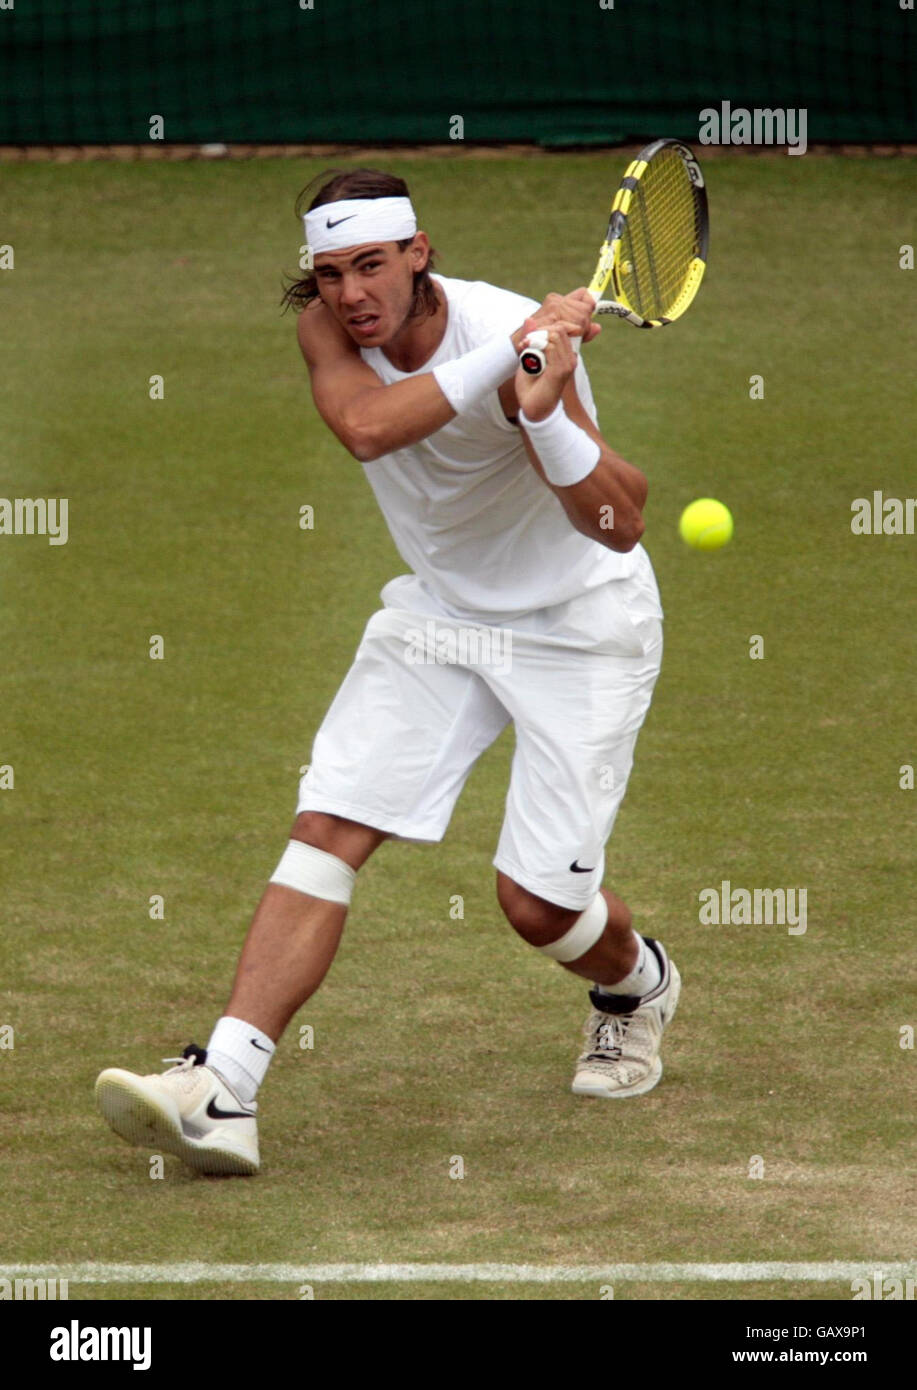 Spain's Rafael Nadal returns to Germany's Andreas Beck during the Wimbledon Championships 2008 at the All England Tennis Club in Wimbledon. Stock Photo